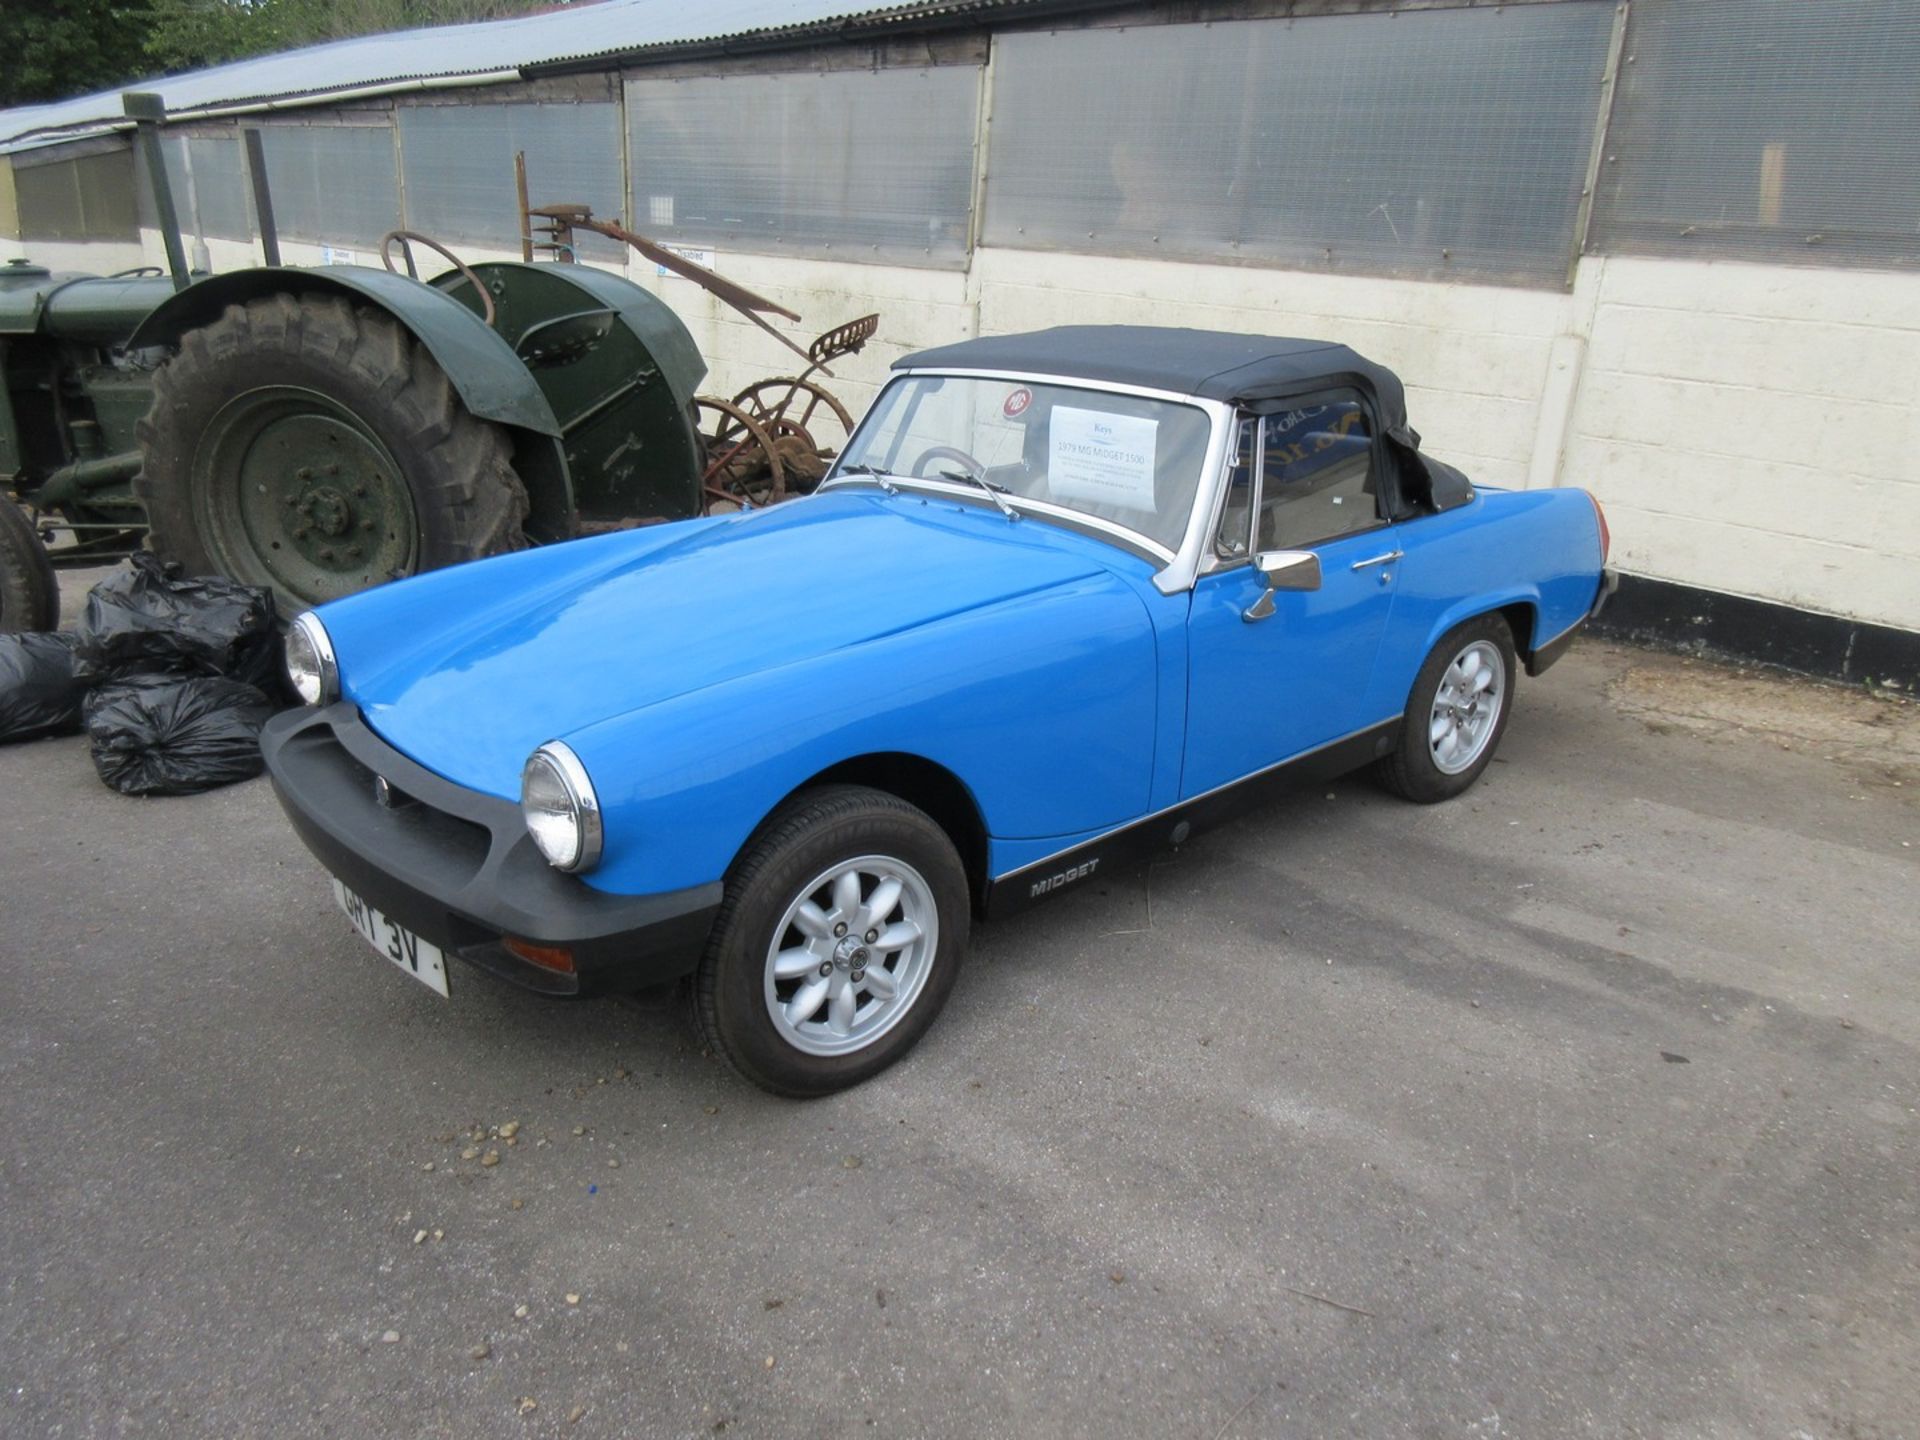 1979 MG Midget 1500 Car, 55000 miles from new, MOT until April 2020, walnut dash and steering wheel - Image 2 of 5